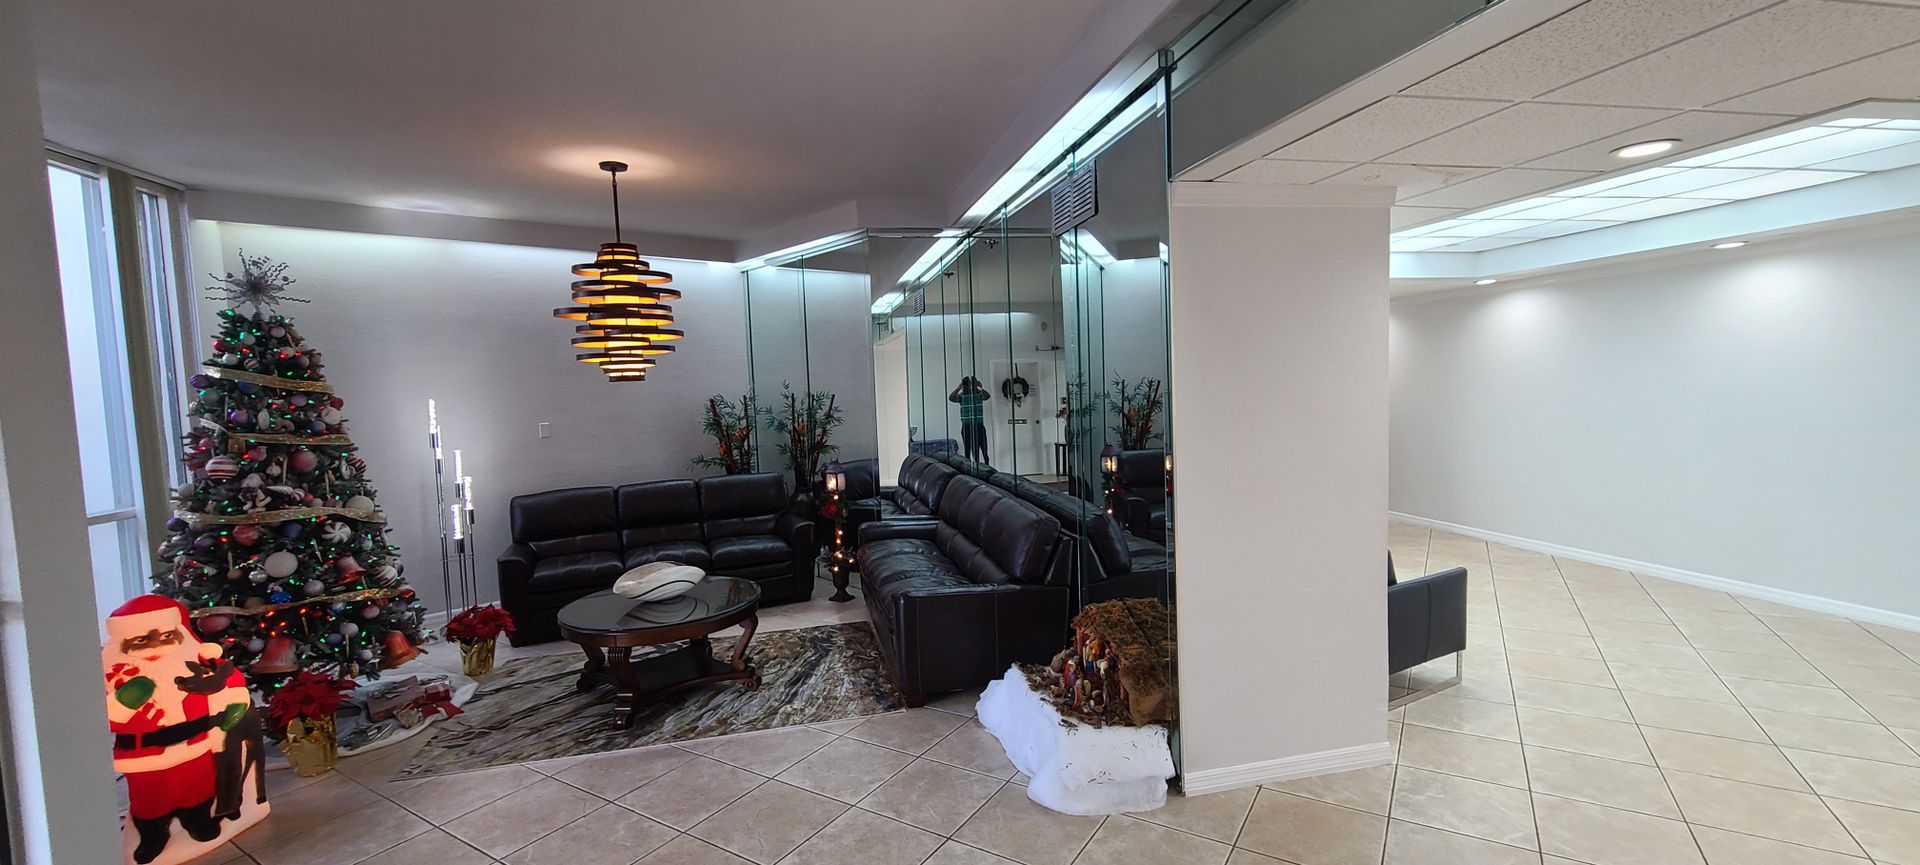 Interior Condo lobby - Commercial painting in Pembroke Pines